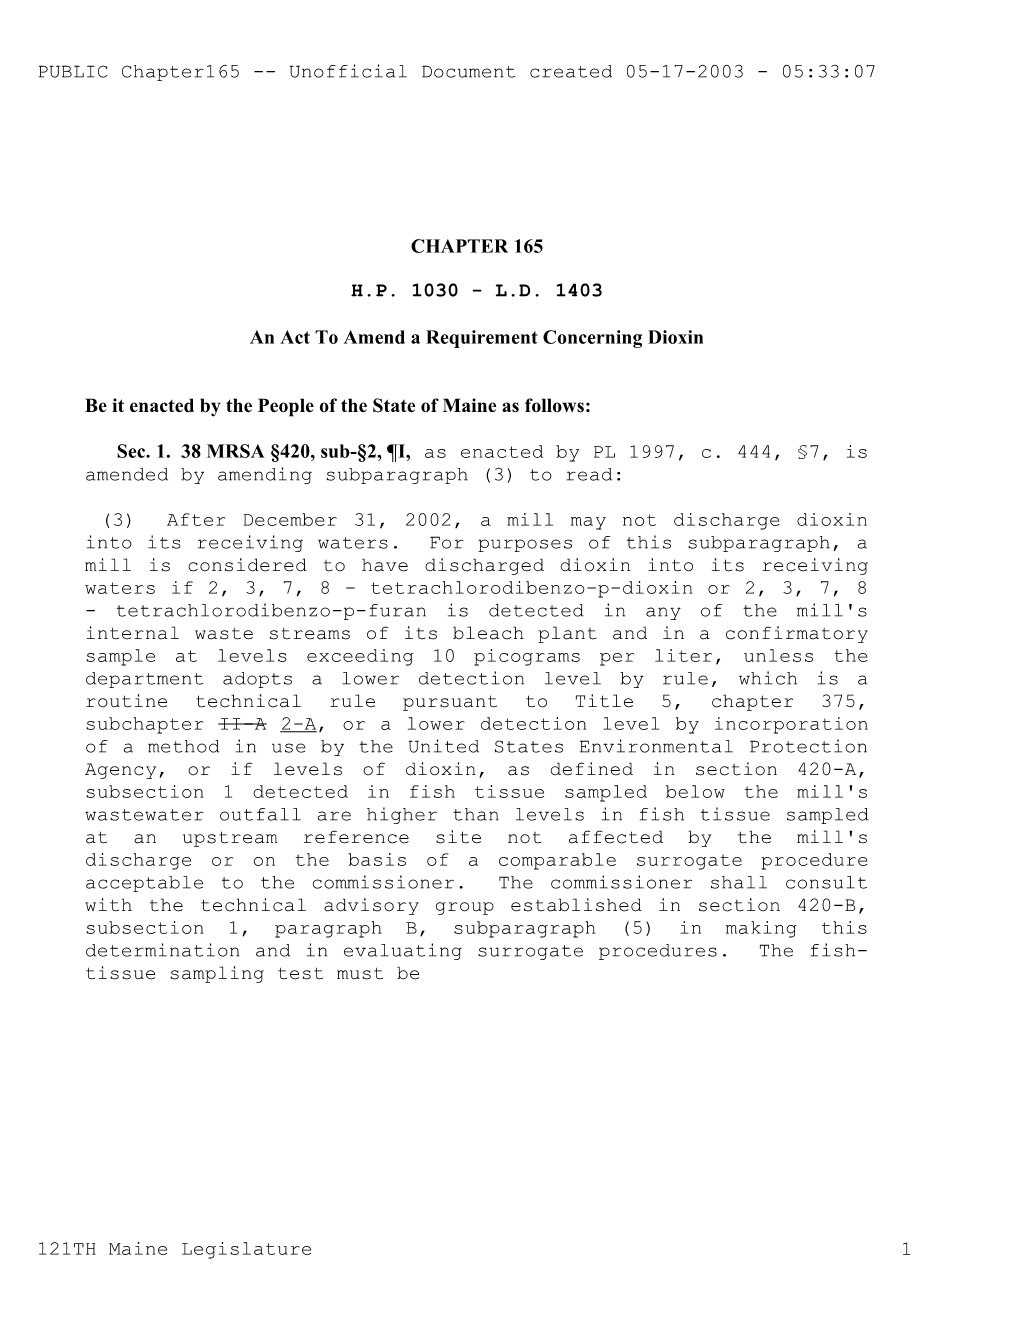 An Act to Amend a Requirement Concerning Dioxin